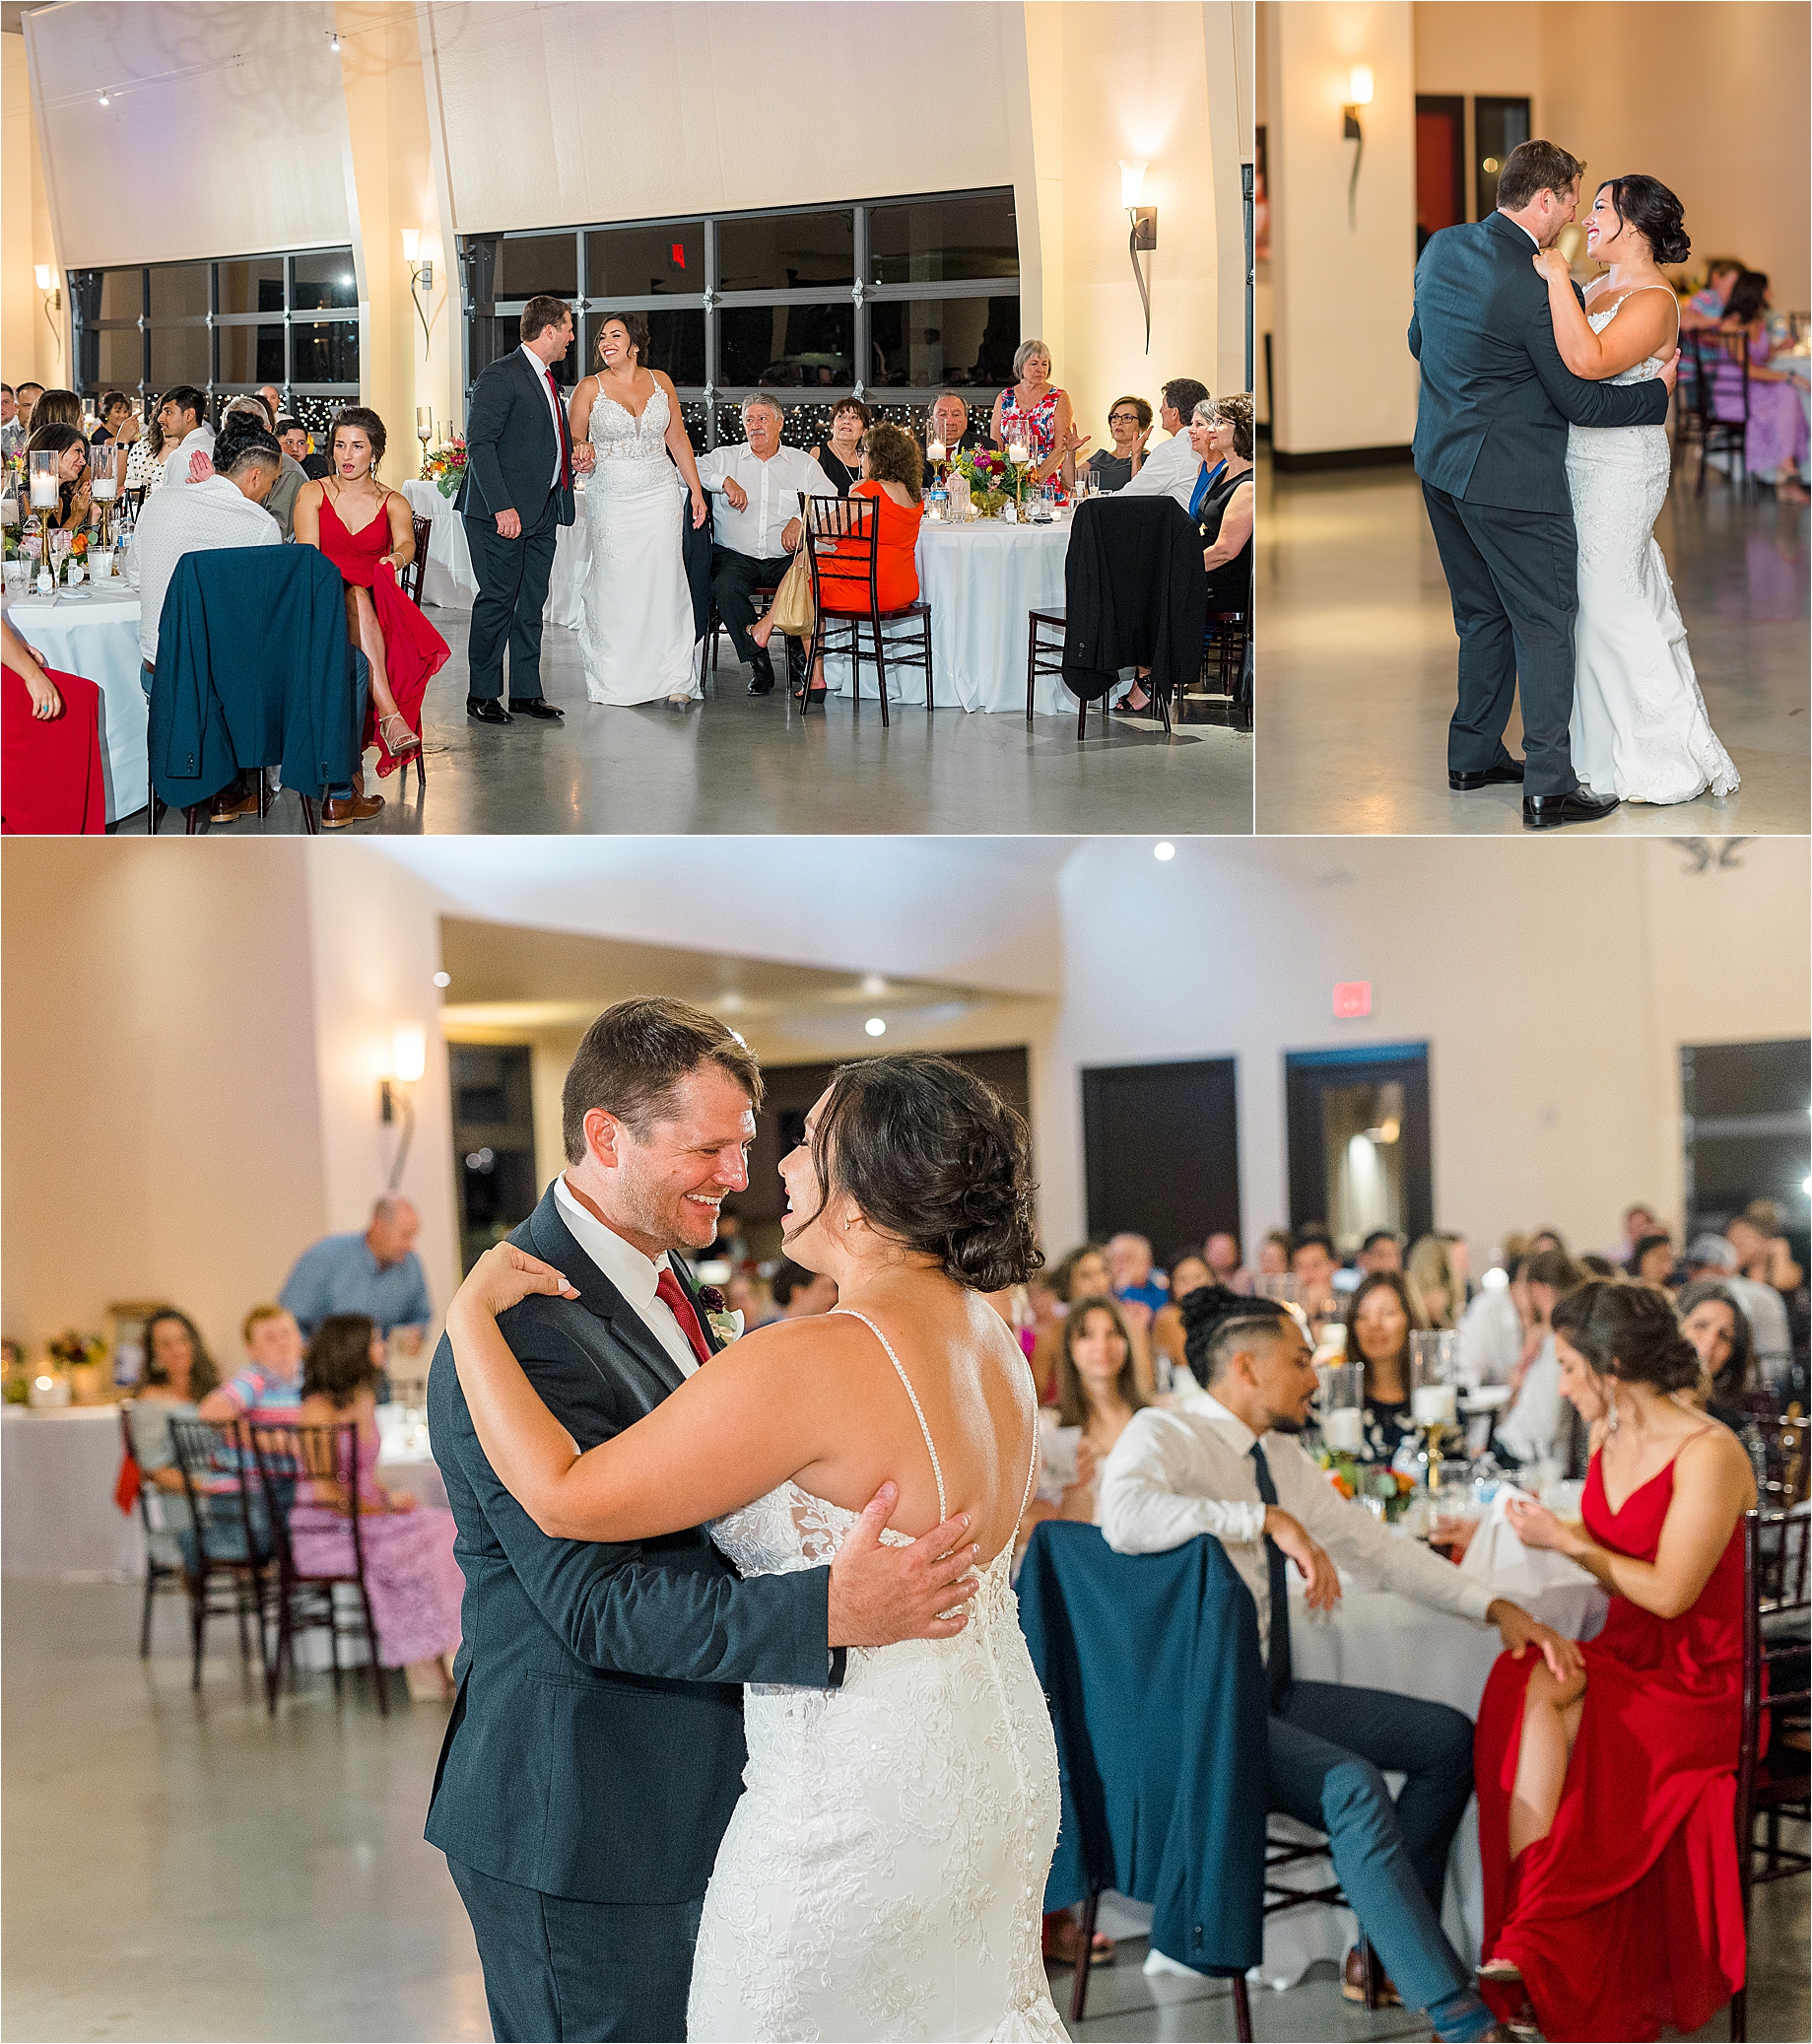 A bride and groom share their first dance at Paniolo Ranch in Boerne, Texas